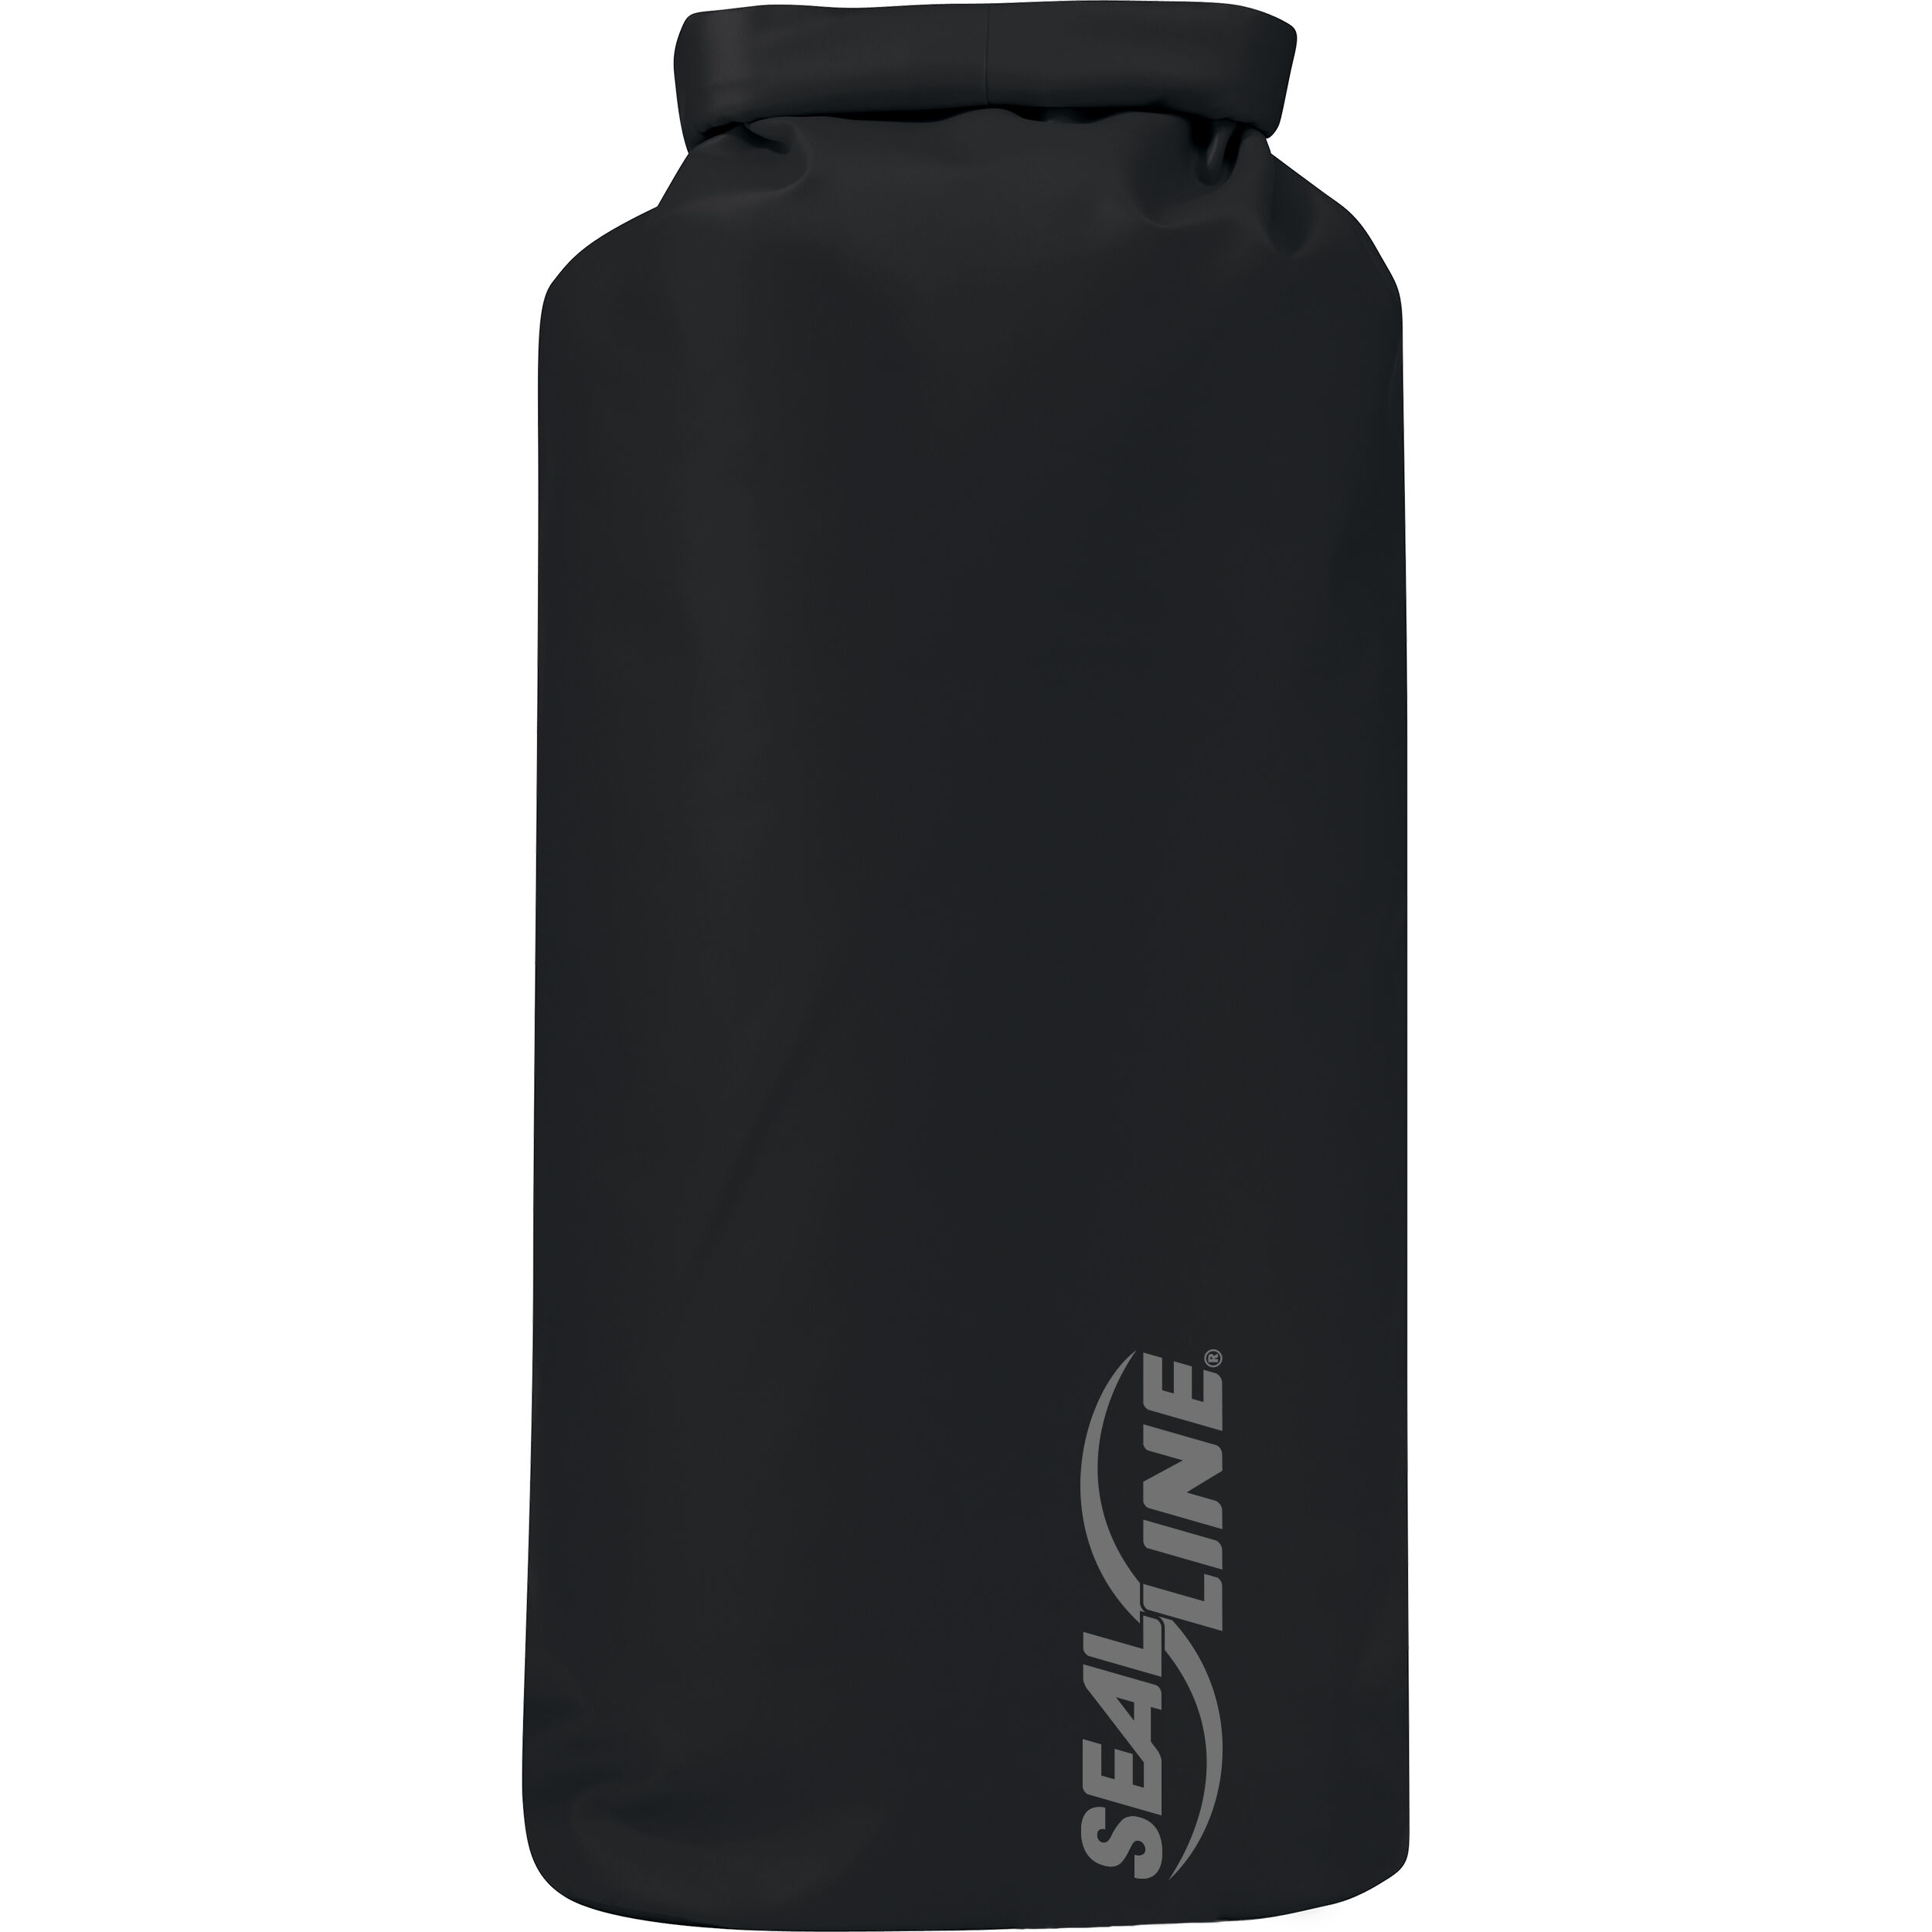 Discovery™ Dry Bag | Essential Dry Bag Protection | SealLine